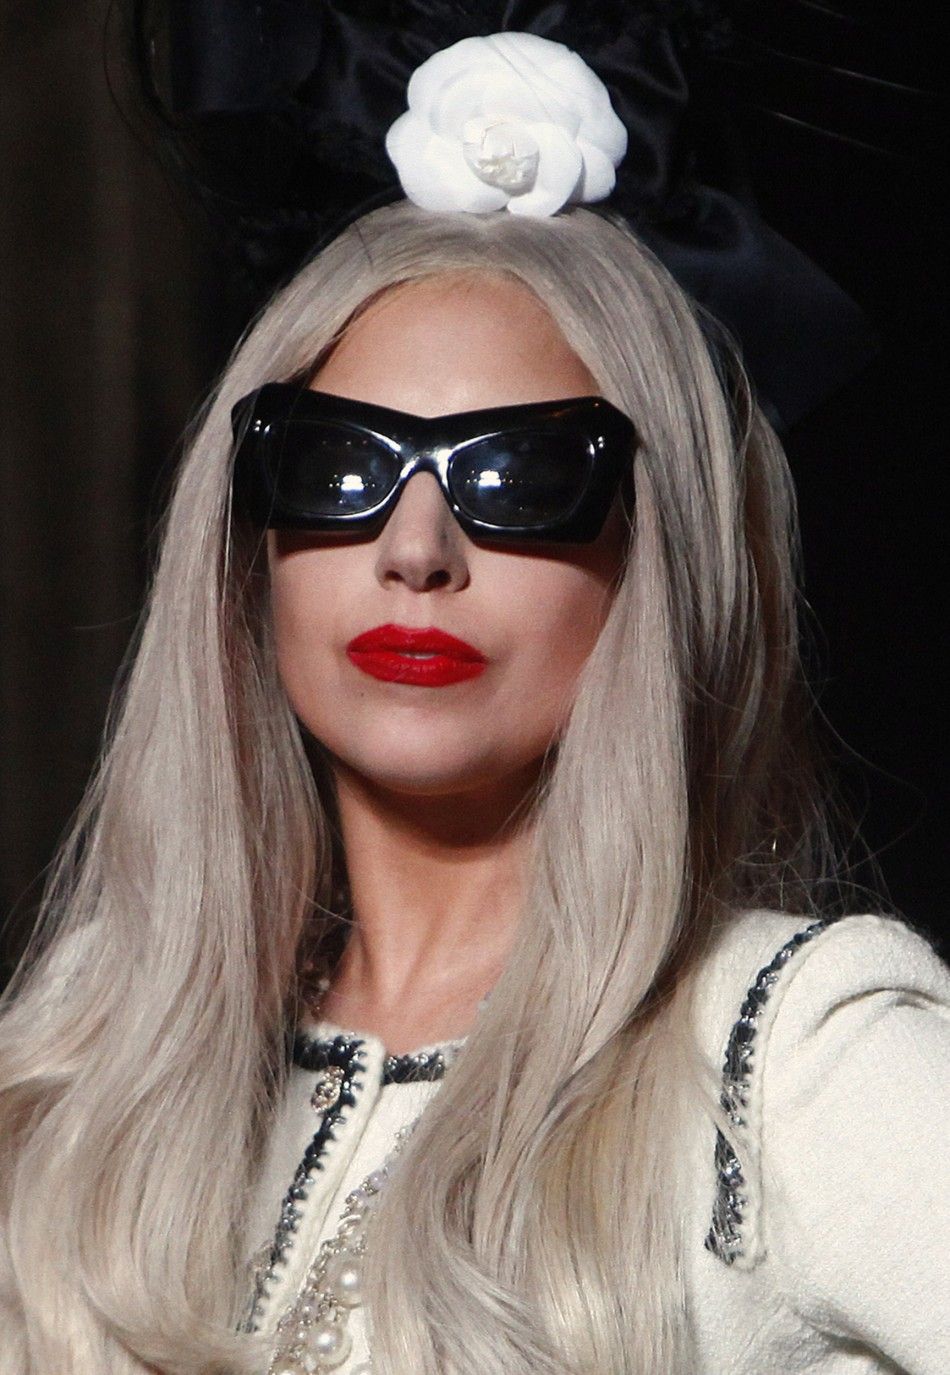 Singer Lady Gaga appears at a ribbon cutting ceremony of Gagas Workshop